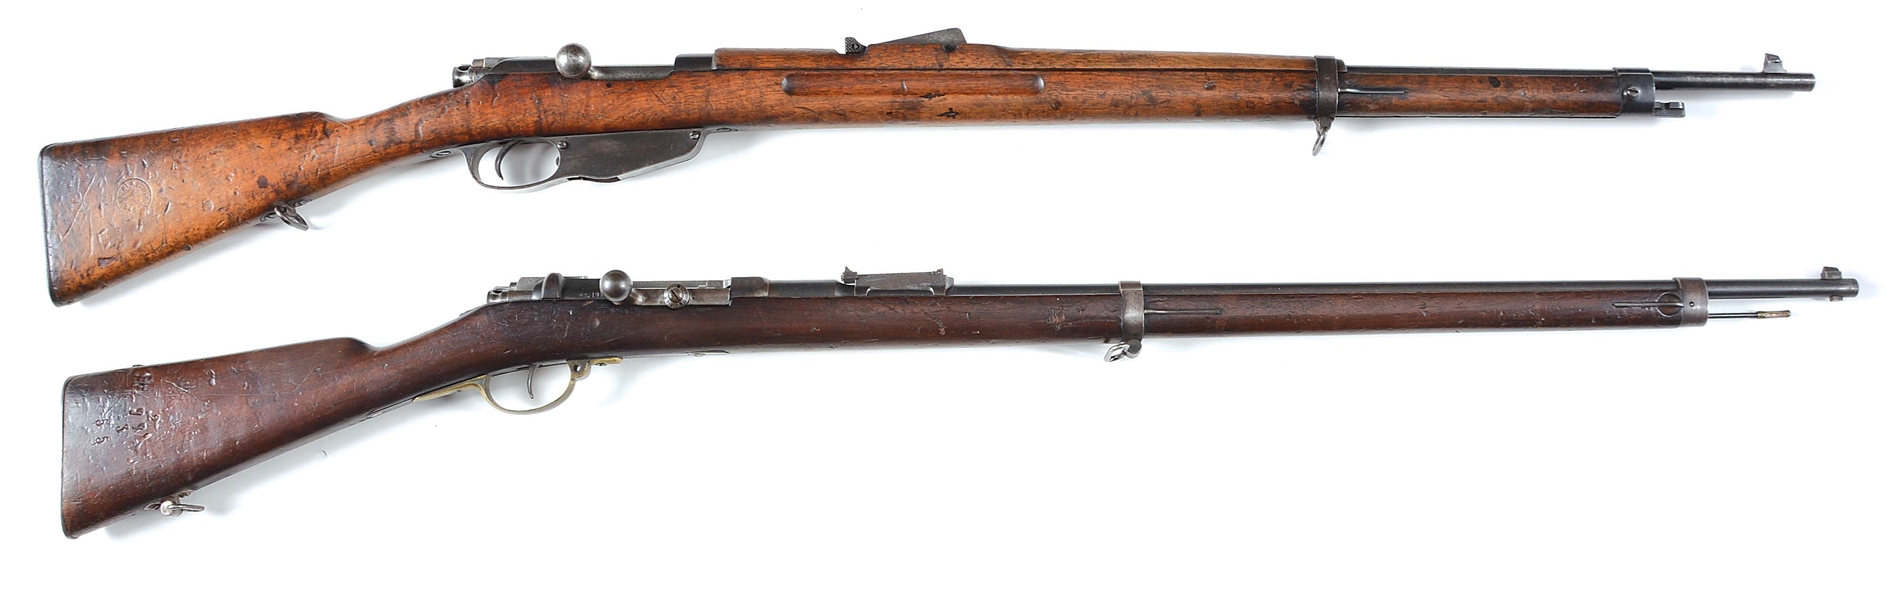 (C+A) LOT OF 2: INTERESTING EUROPEAN MILITARY BOLT ACTION RIFLES.